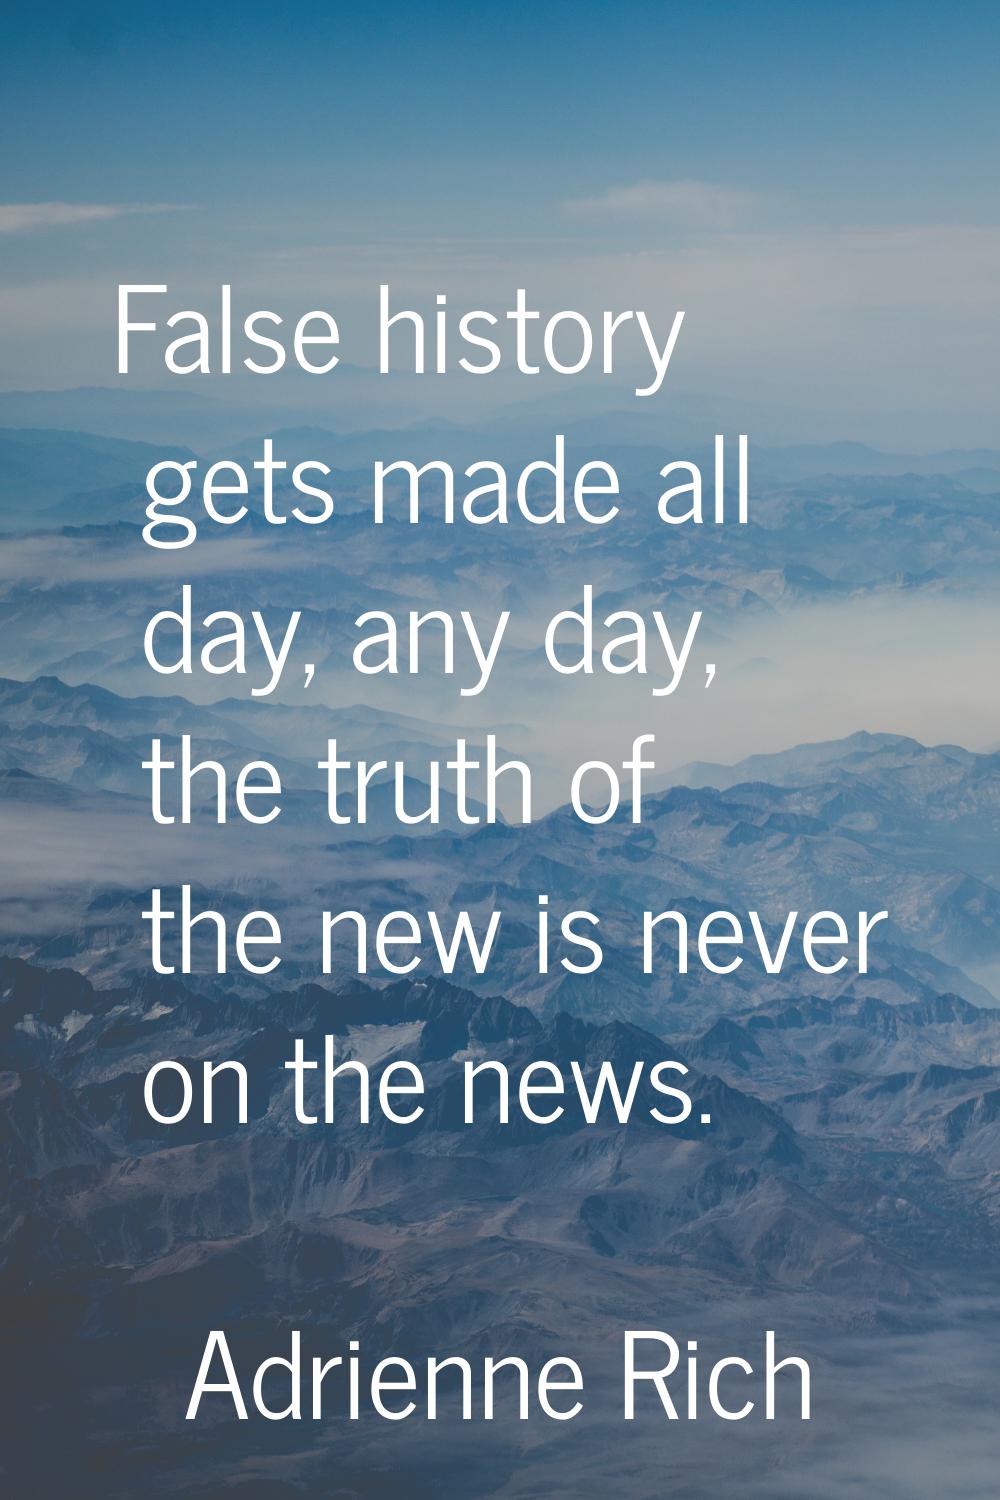 False history gets made all day, any day, the truth of the new is never on the news.